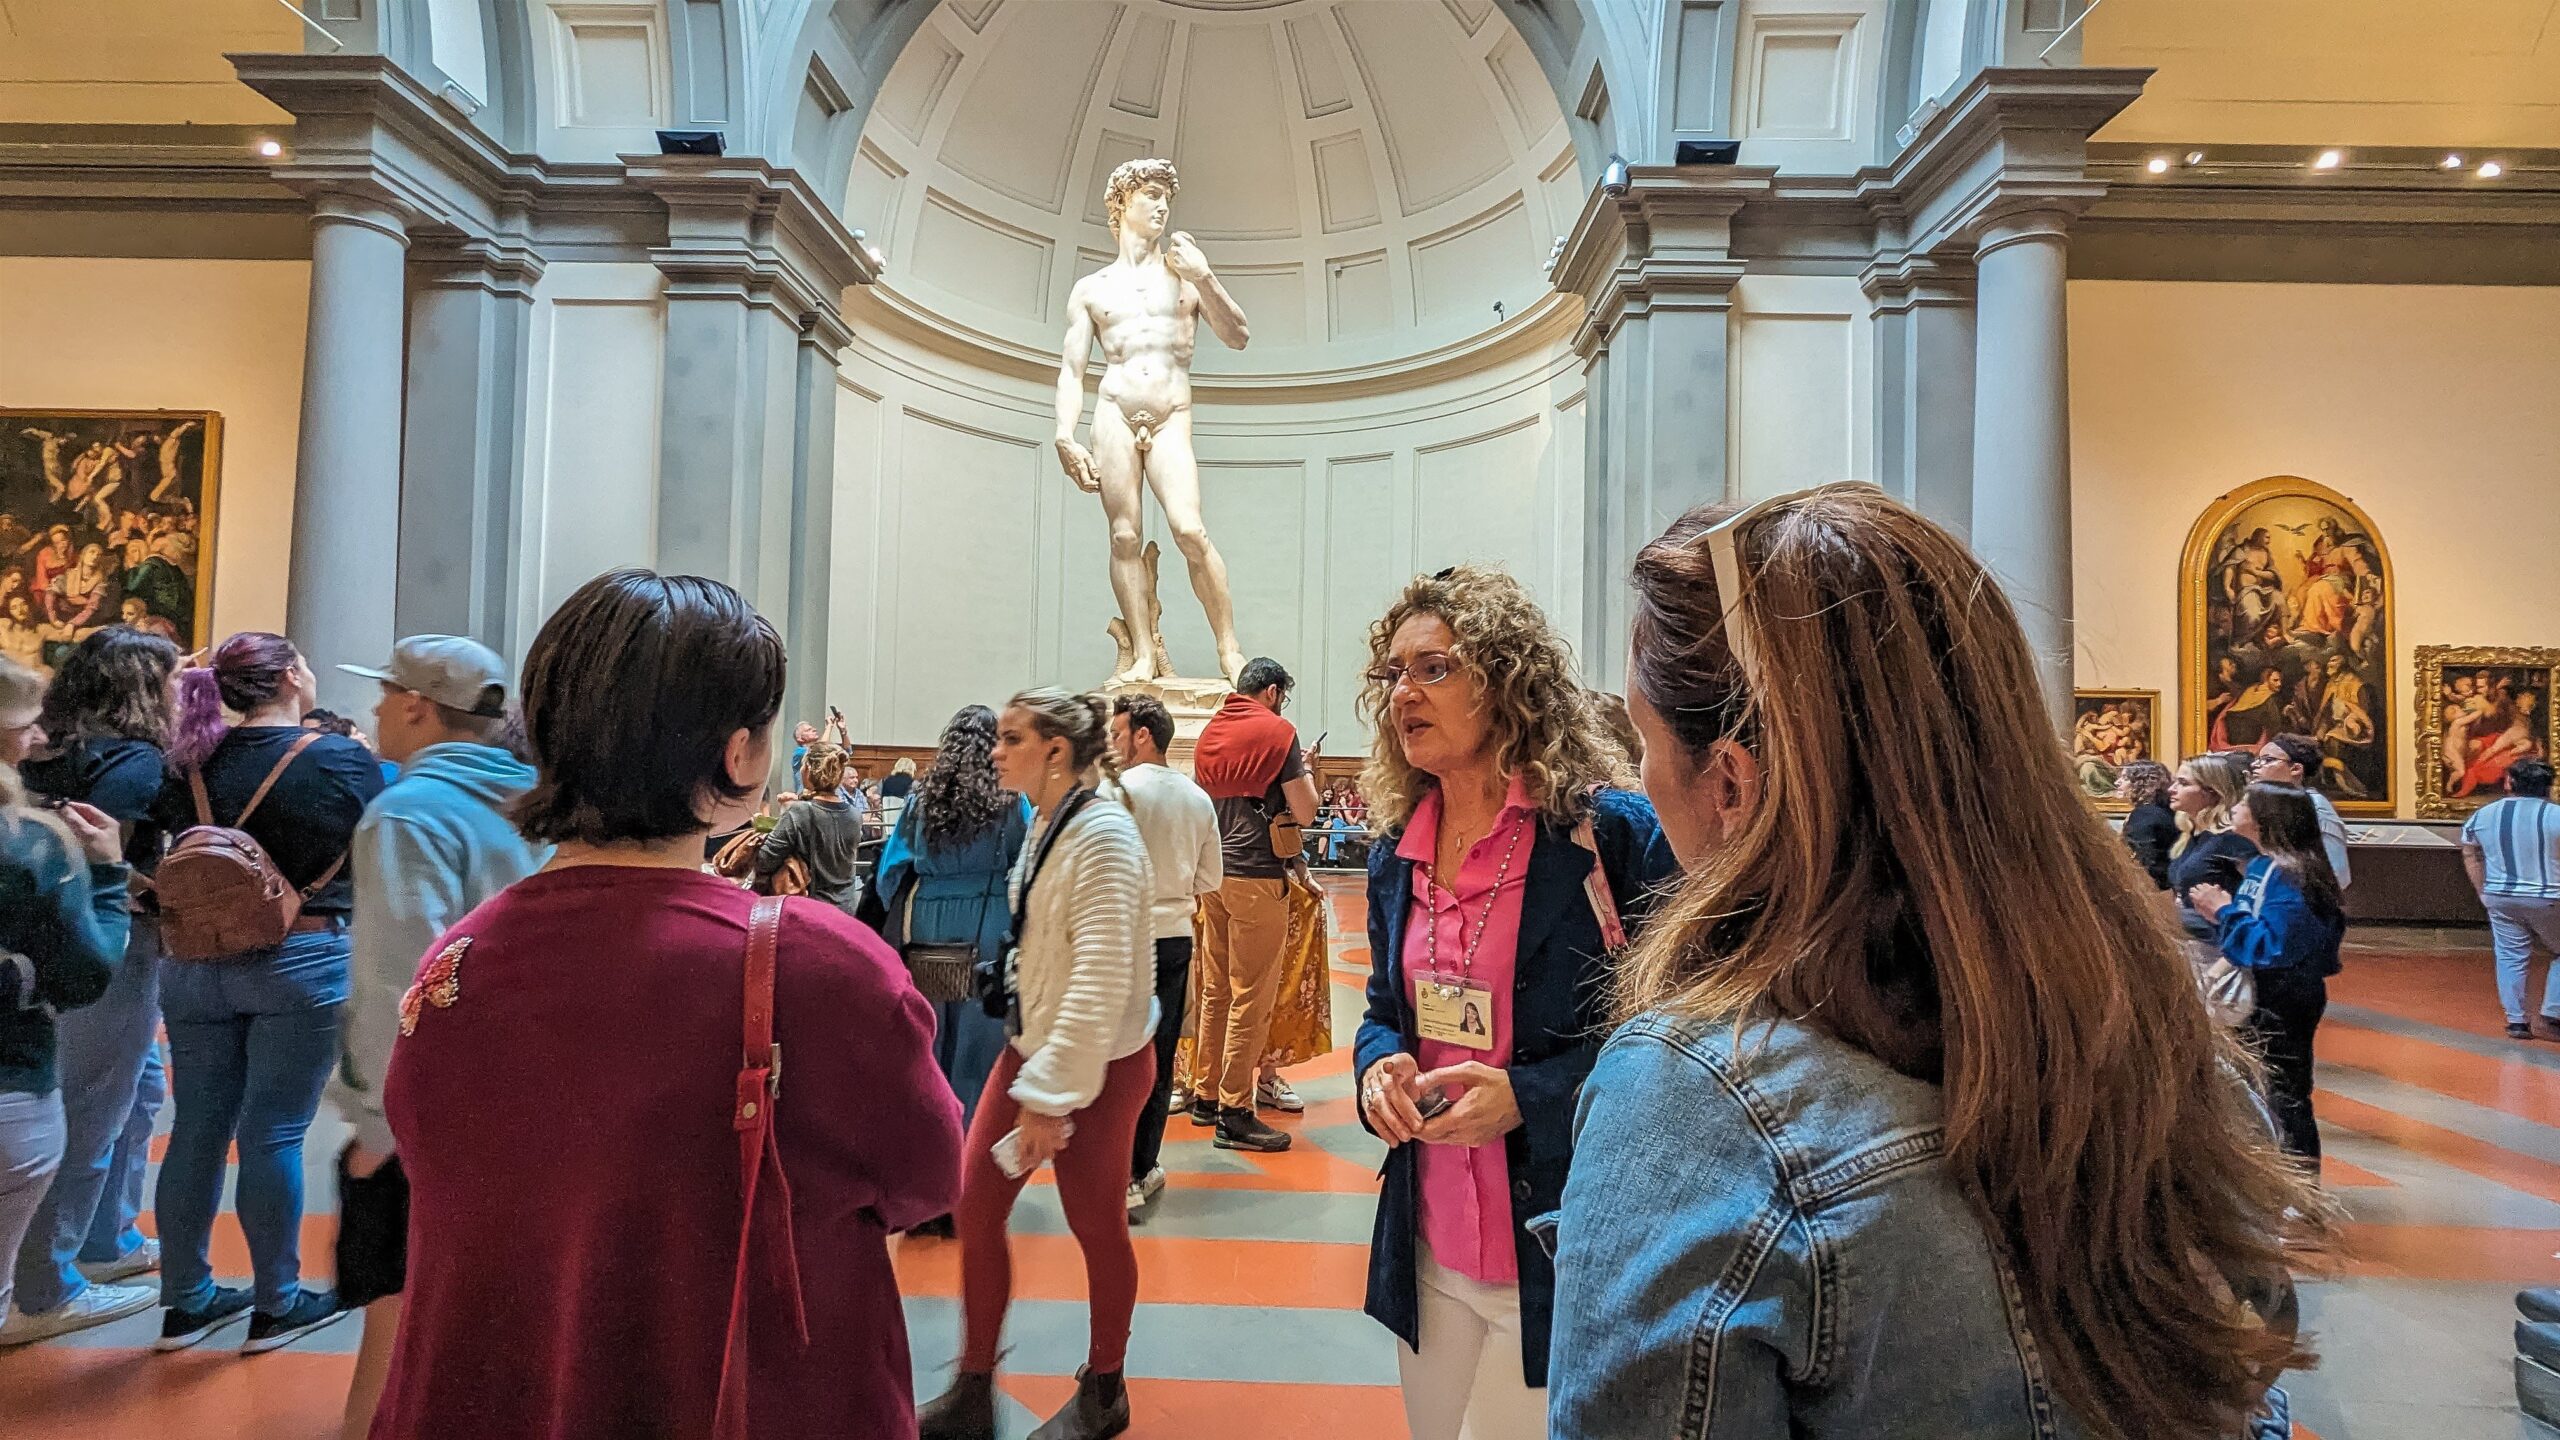 Jennifer in front of the statue of David, one of Michelangelo's greatest works